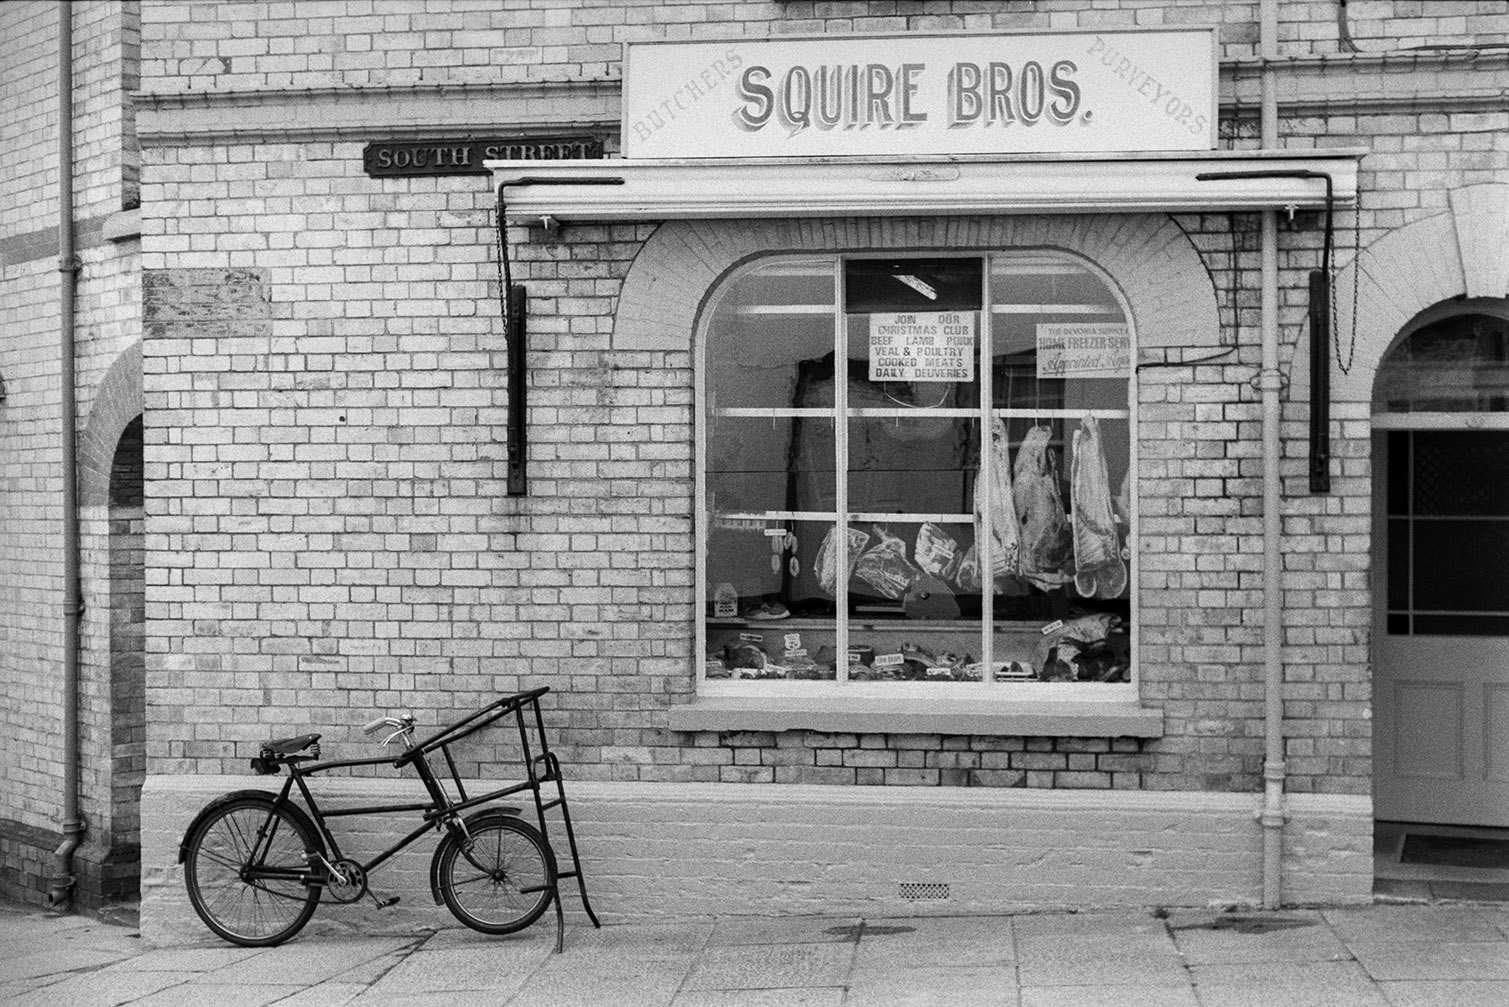 The shop front of Squire Brother's Butchers shop, in South Street, Torrington. A bicycle is parked outside and cuts of meat are on display in the window.